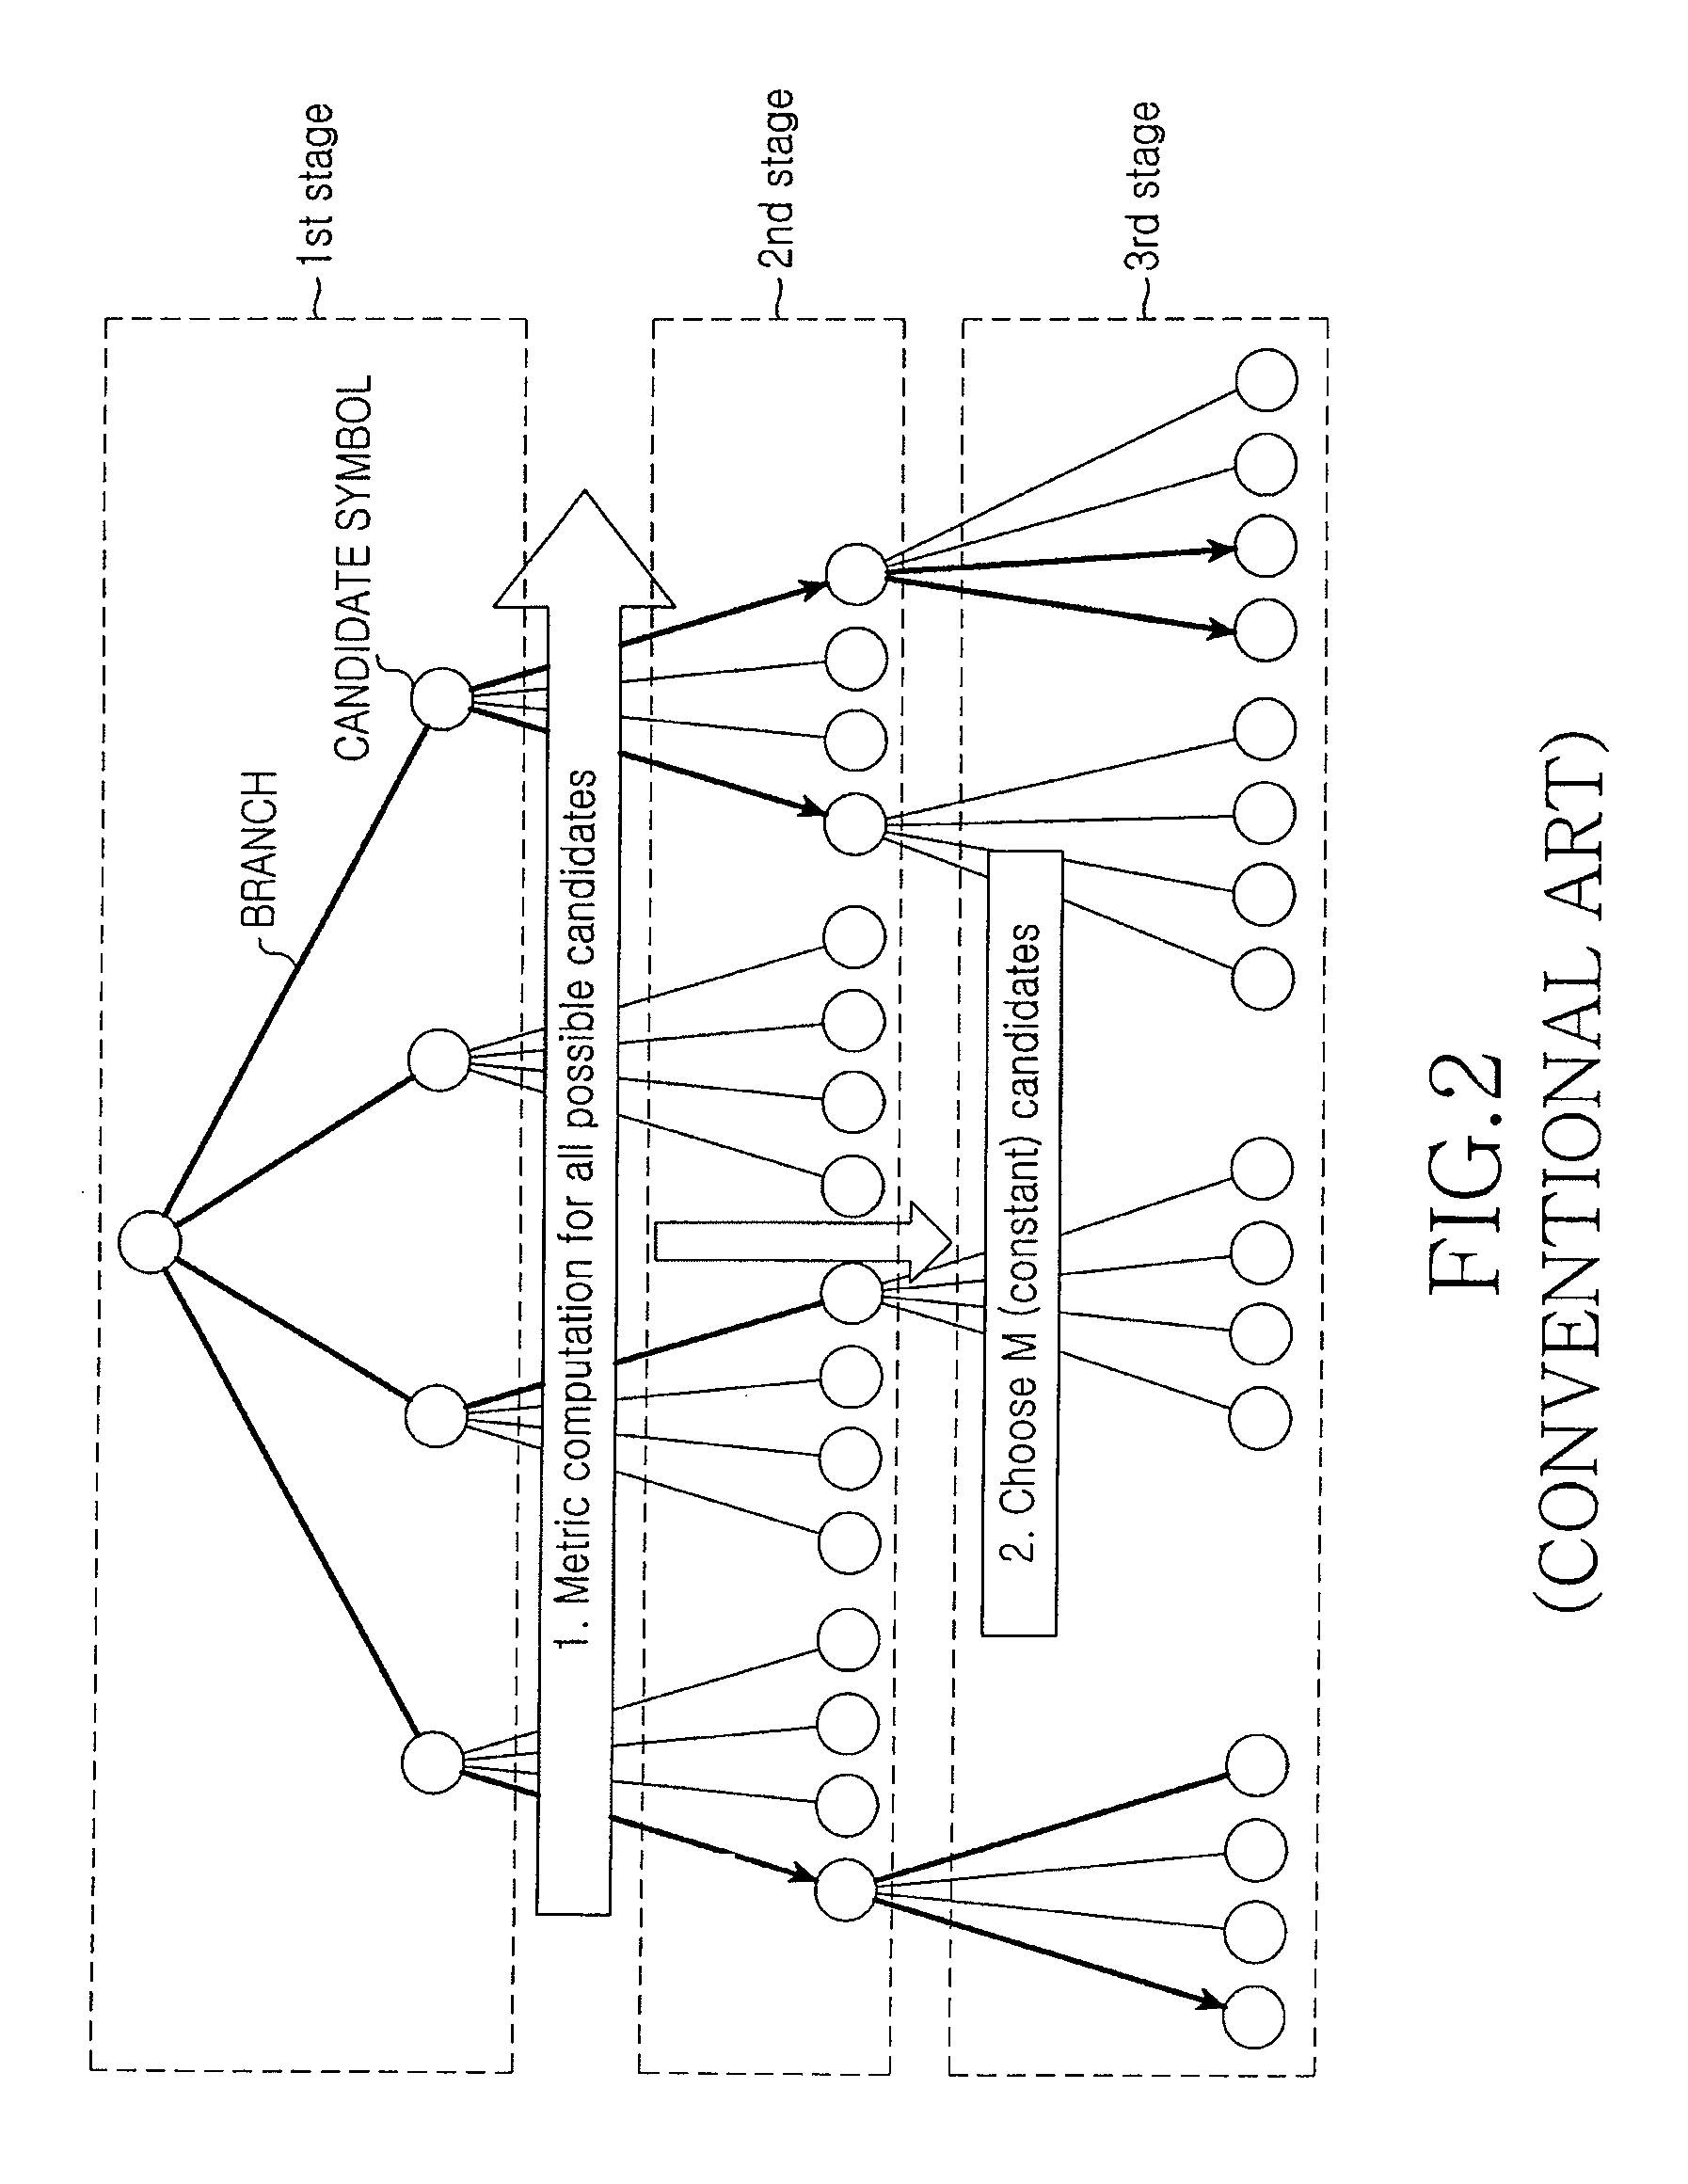 Apparatus and method for detecting a signal in a communication system using multiple antennas